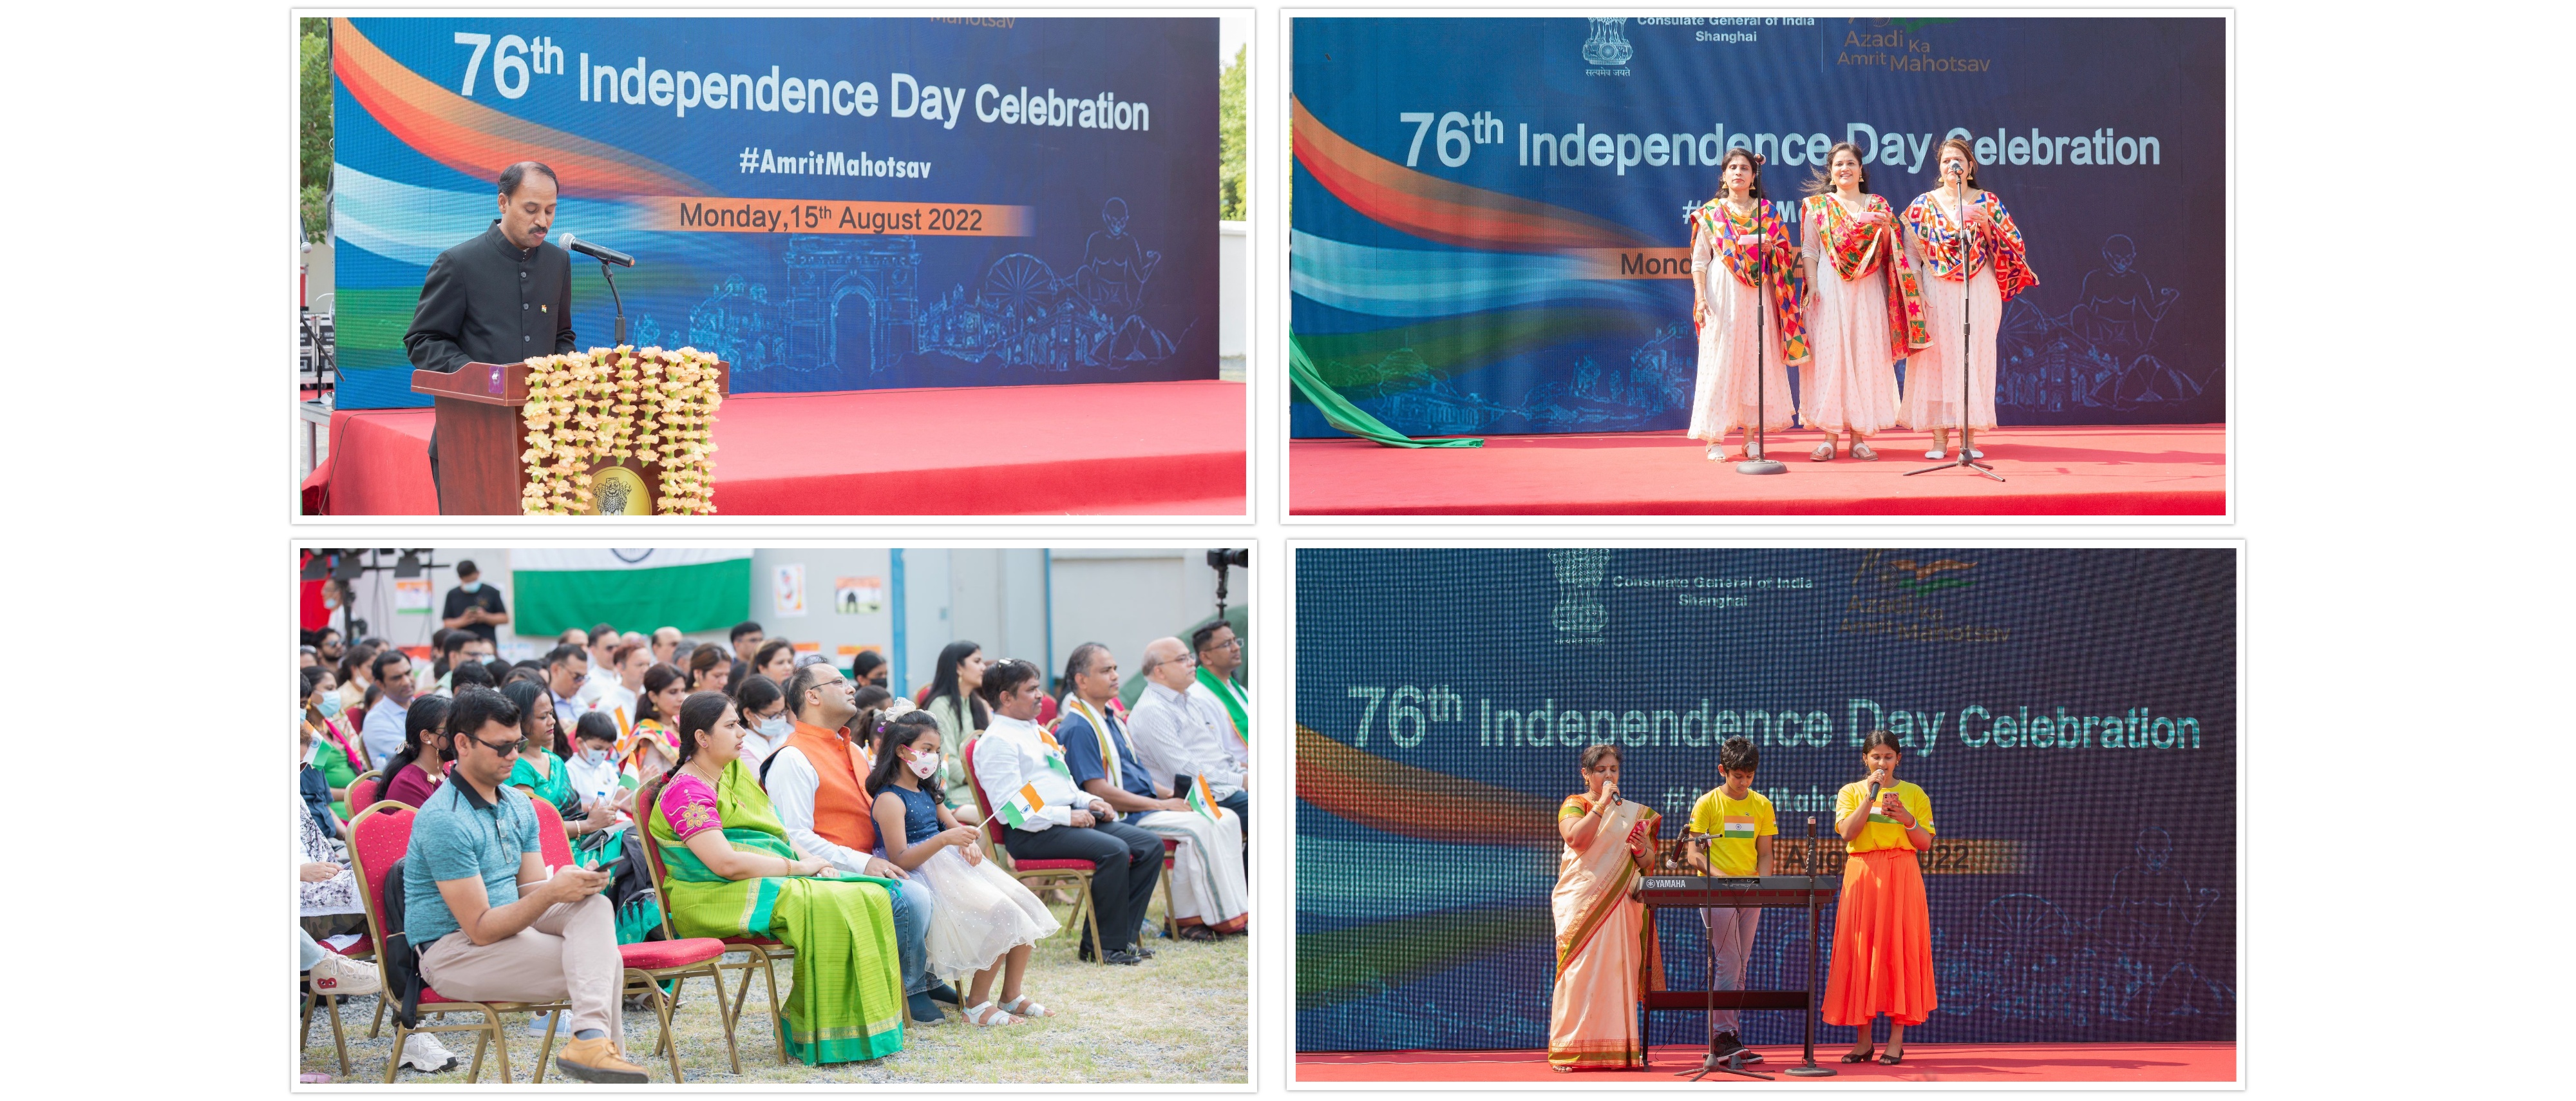 Celebration of 76th Independence Day of India in Shanghai (15 August 2022)